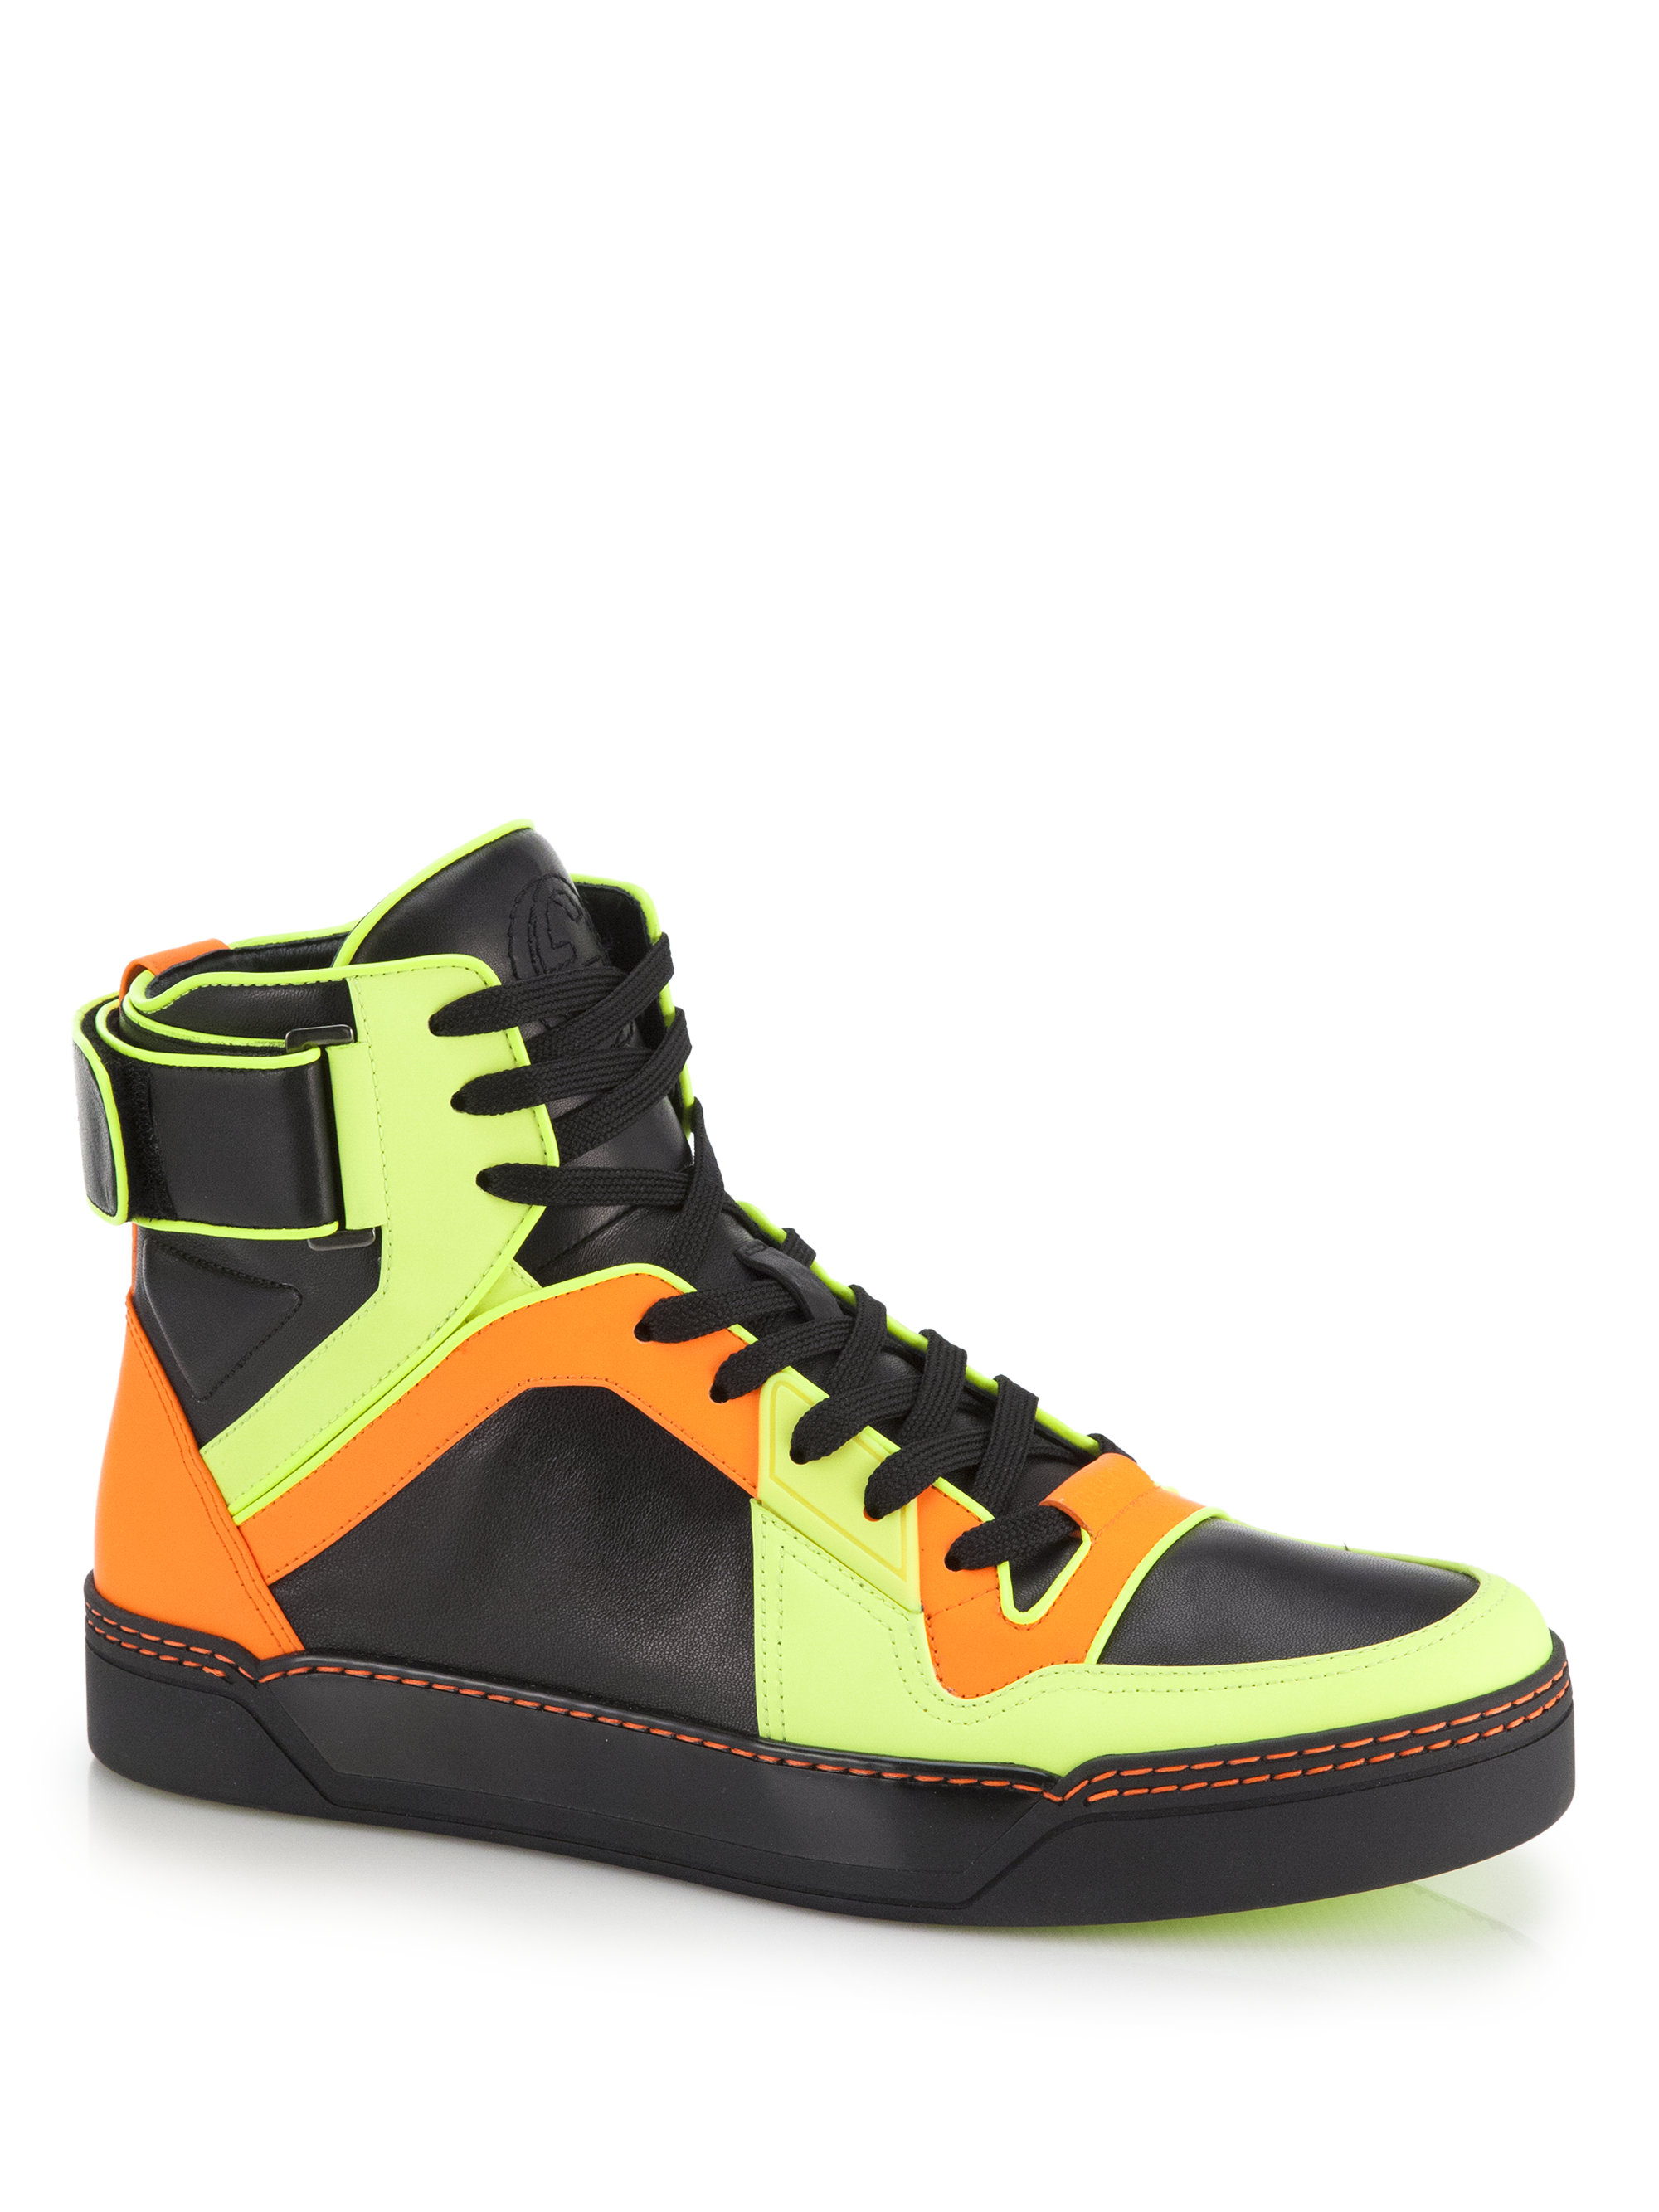 gucci neon high top sneakers